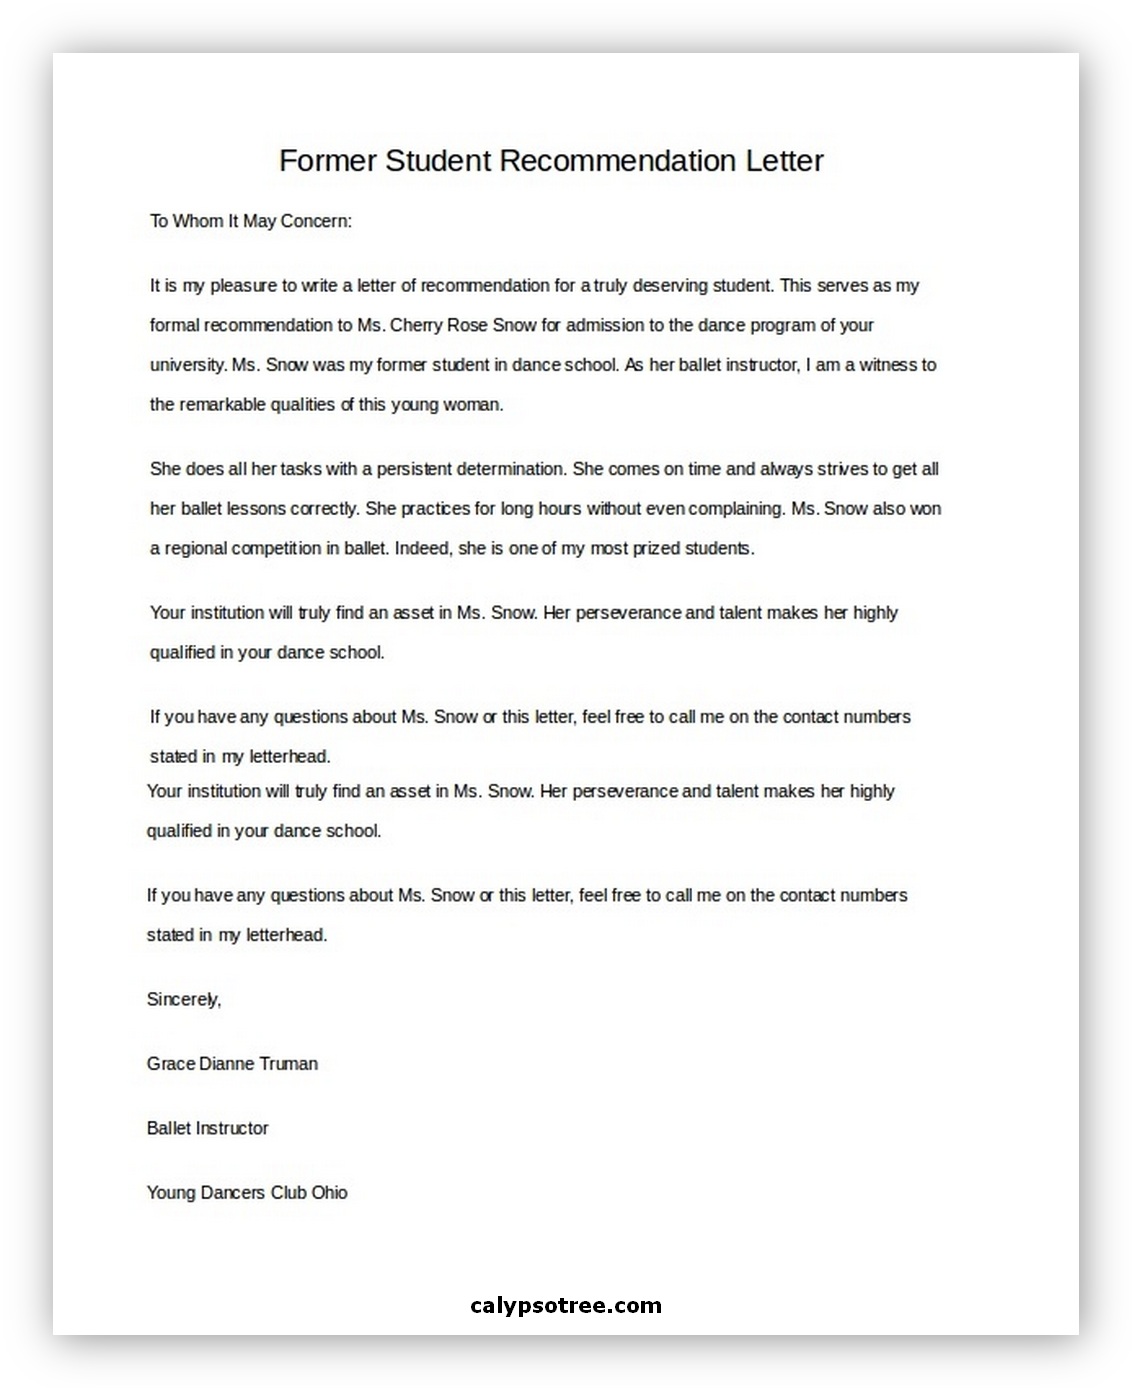 Letter of Recommendation for Student 02